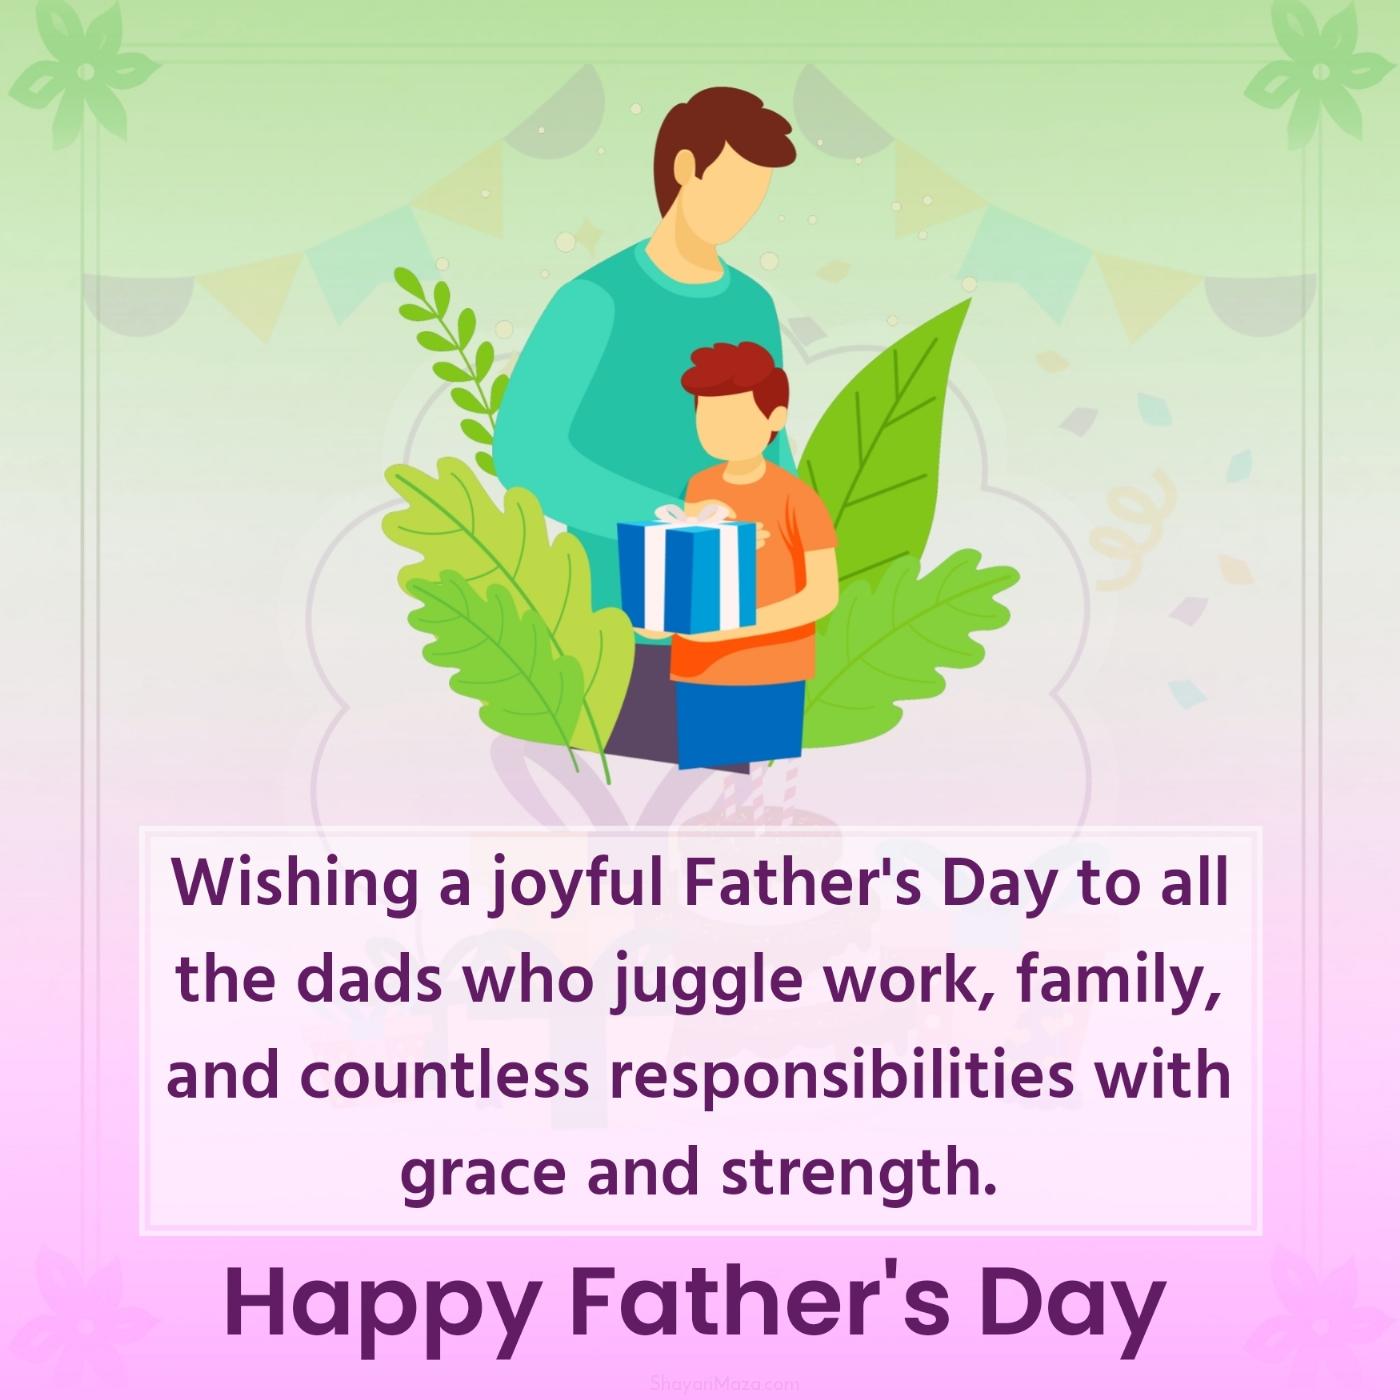 Wishing a joyful Father's Day to all the dads who juggle work